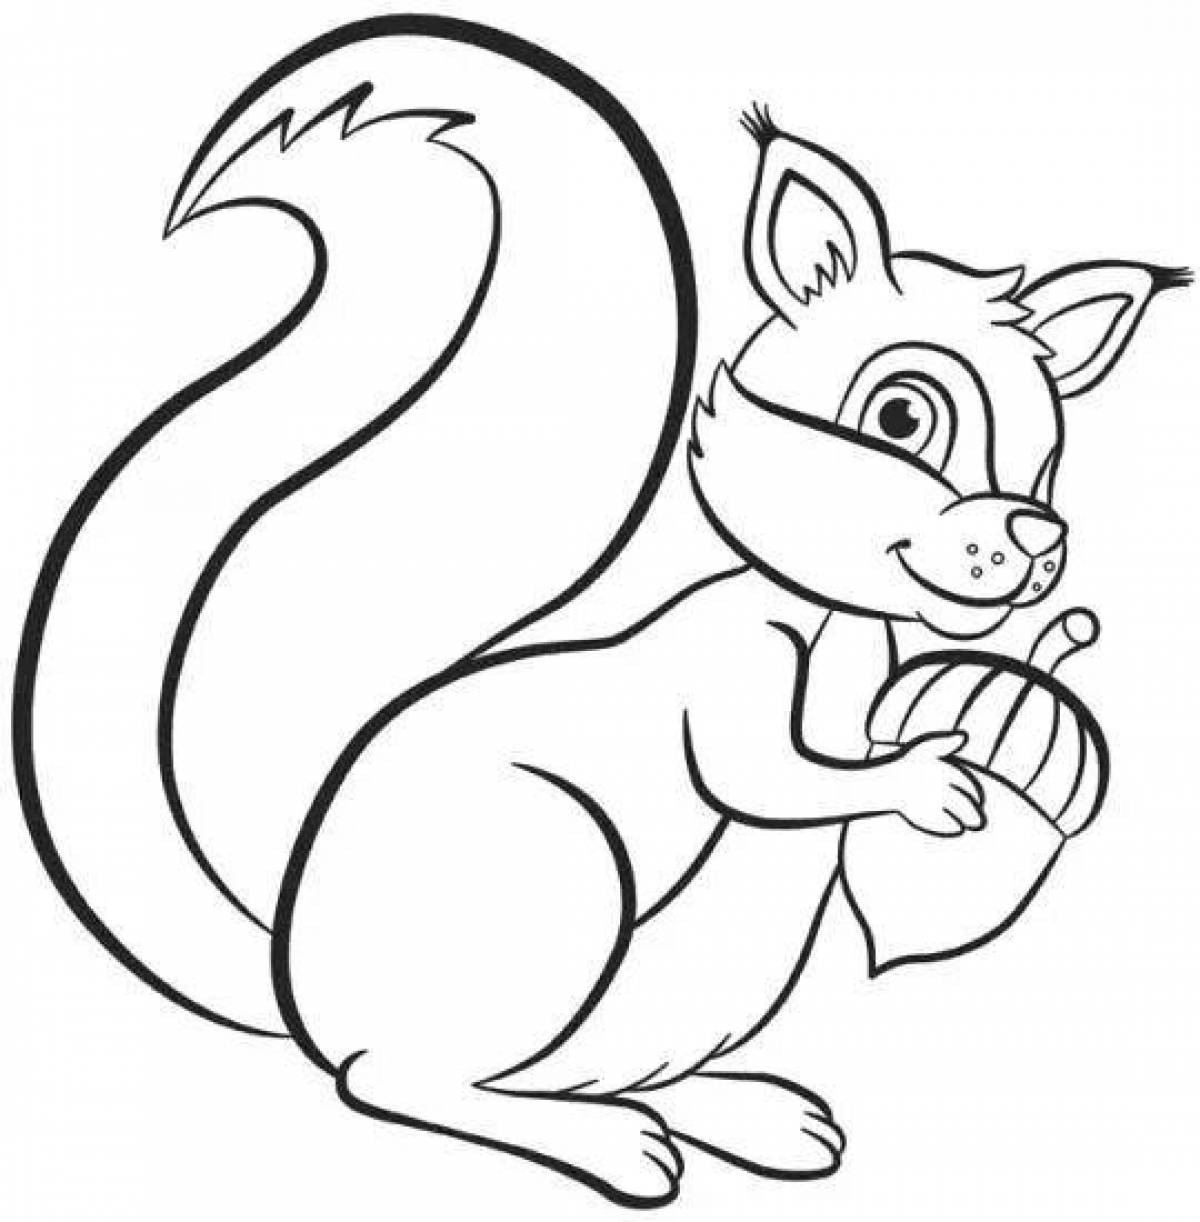 Zany squirrel coloring book for 3-4 year olds